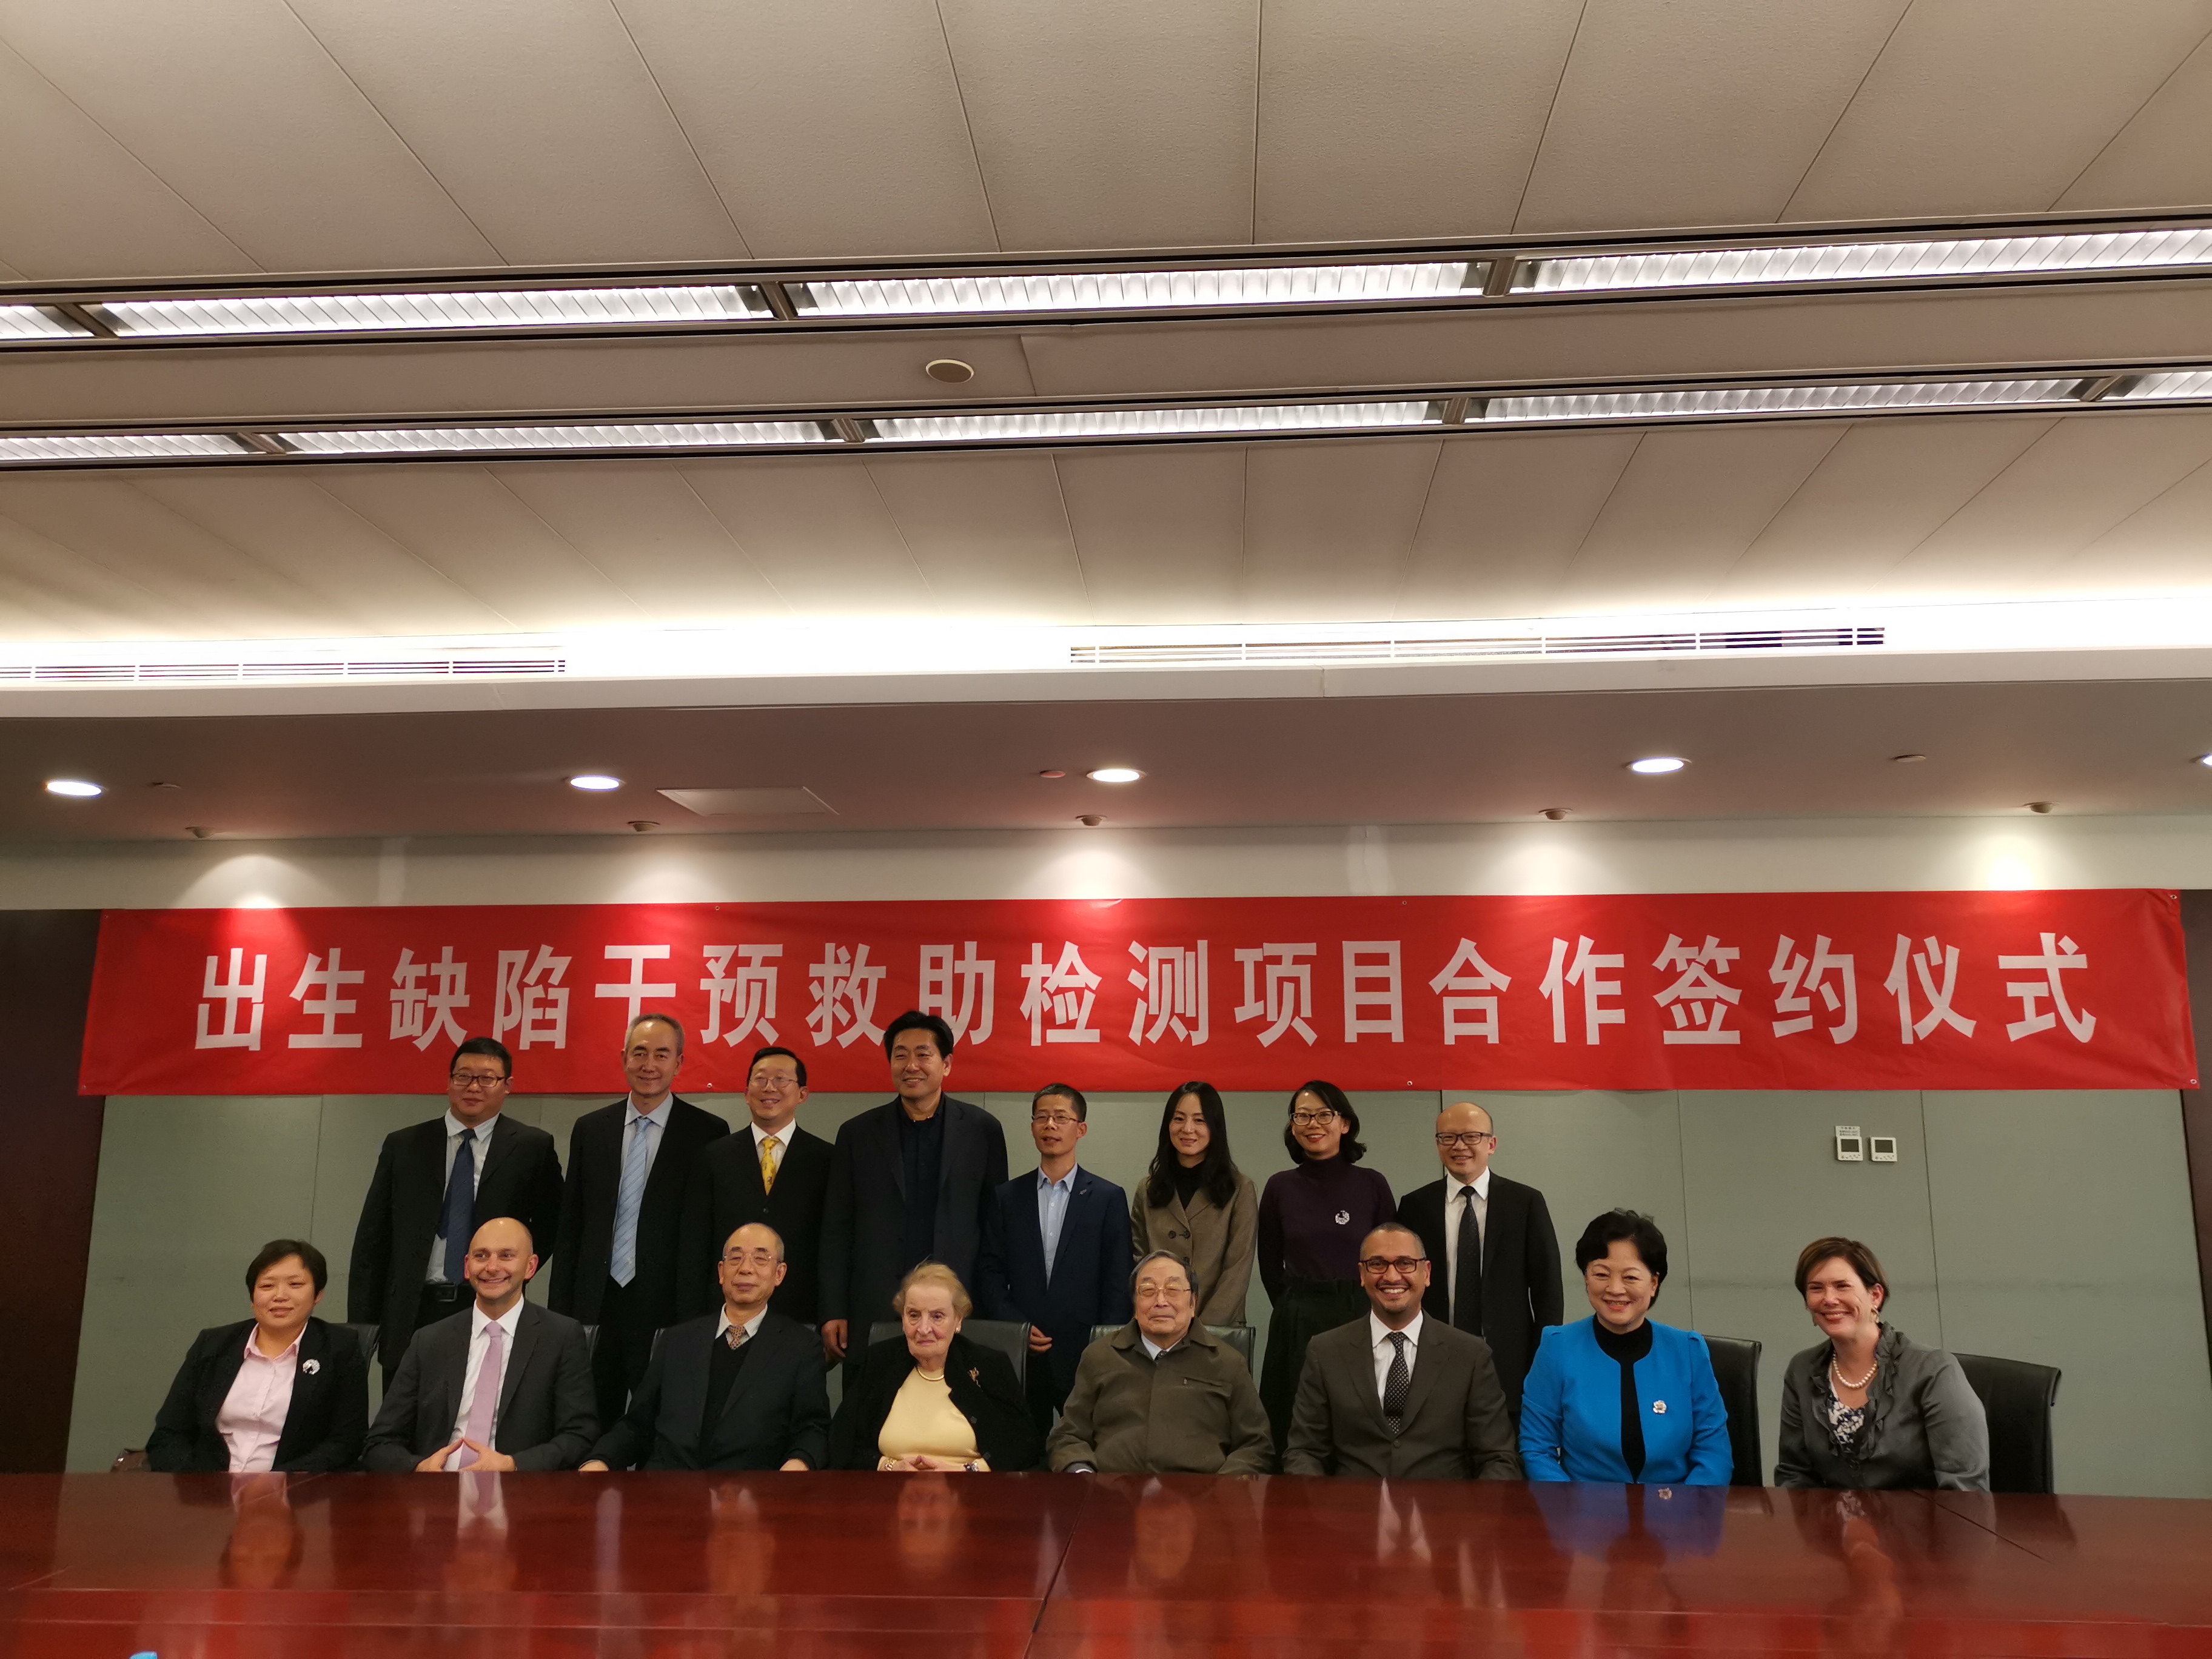 March of Dimes Birth Defects Foundation of China selects Illumina as its partner